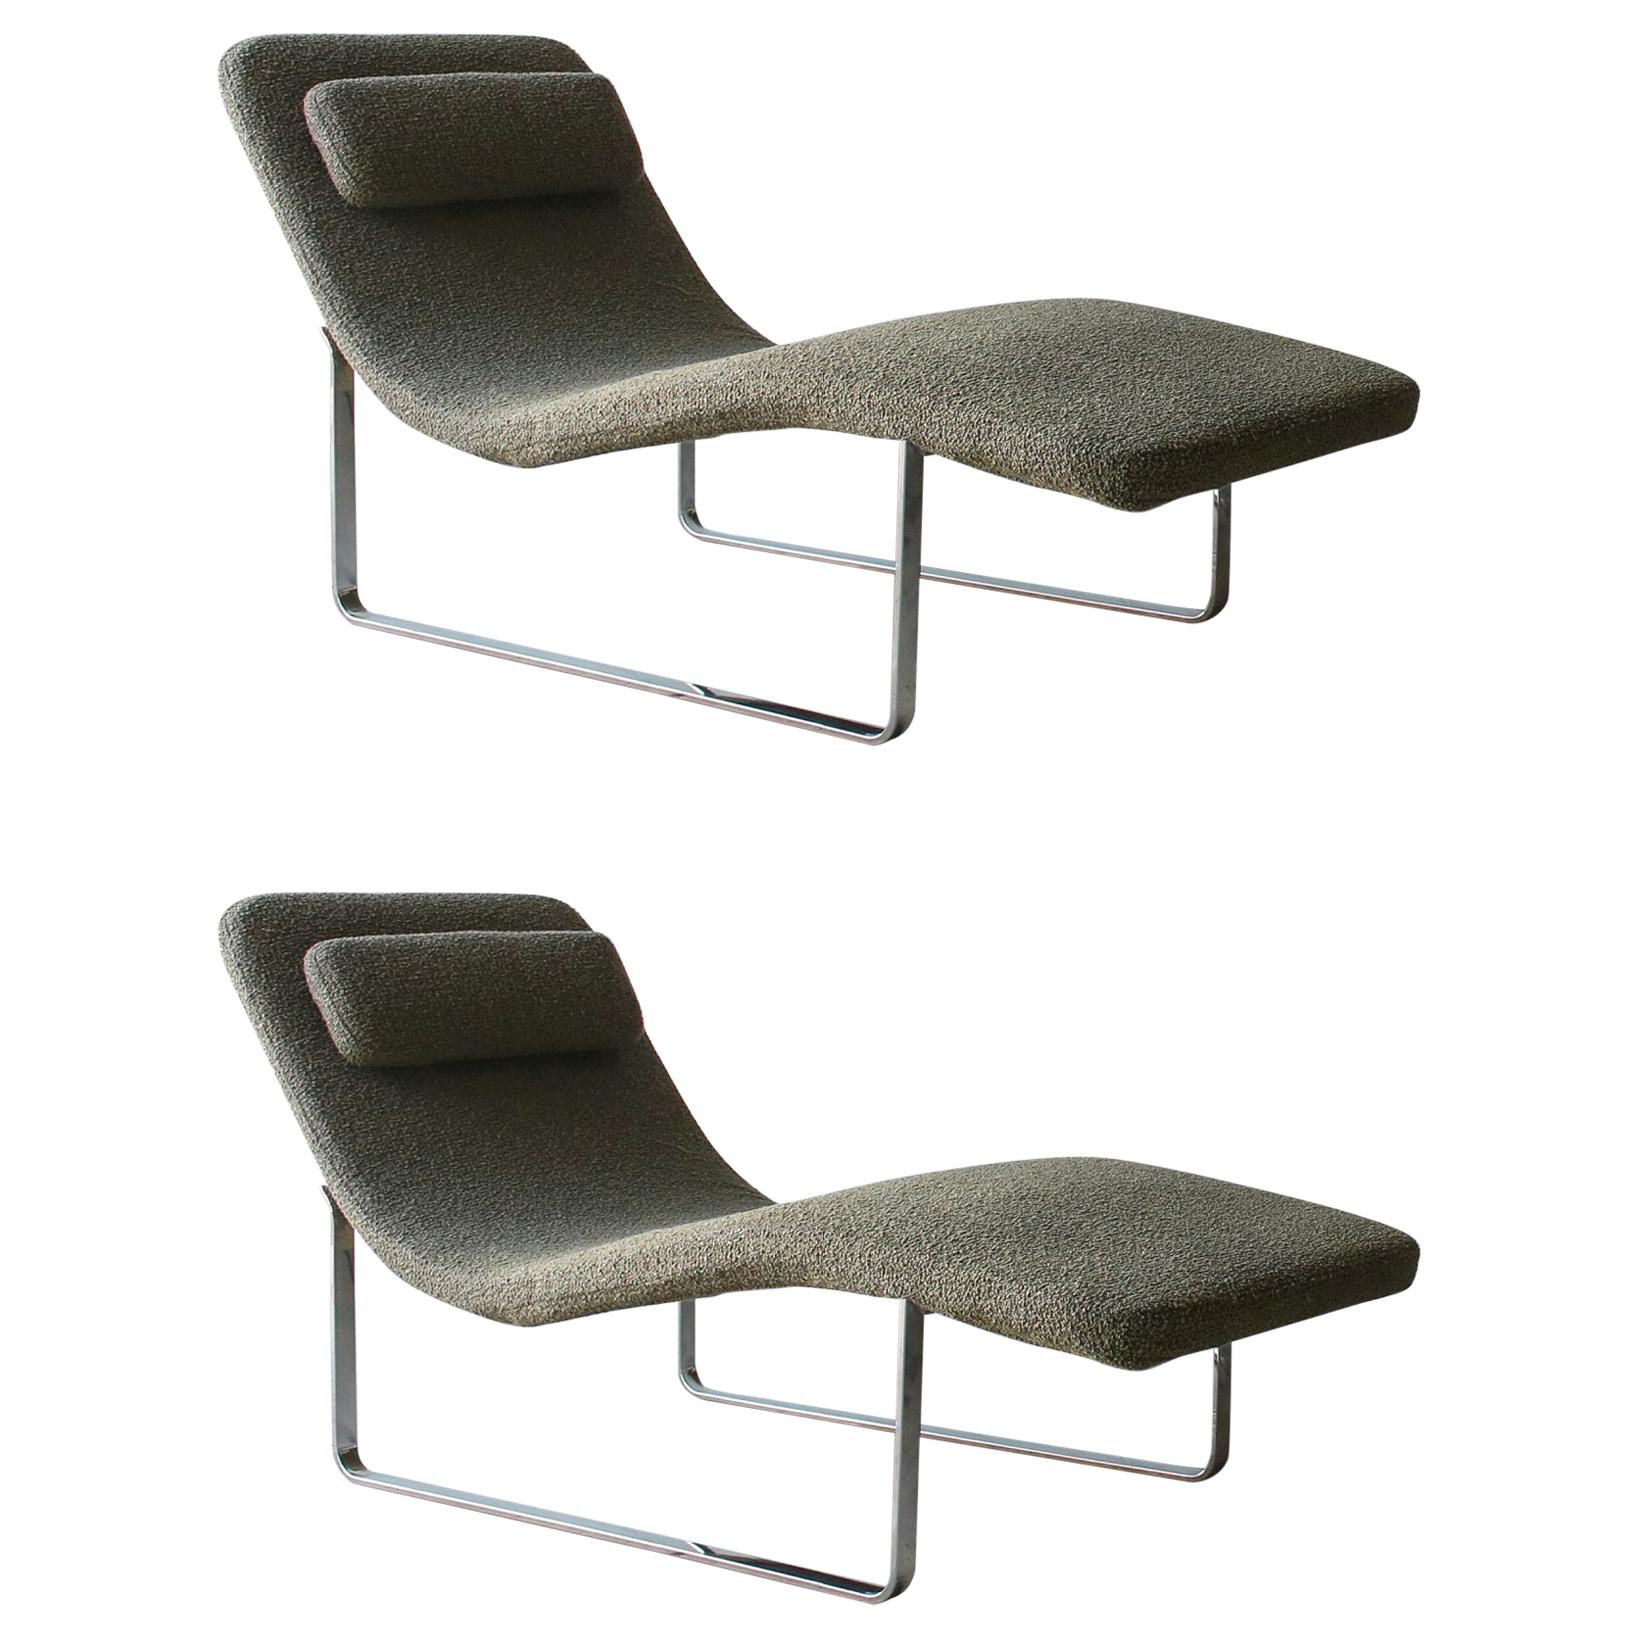 Pair of Landscape Chaise Lounges by B & B Italia